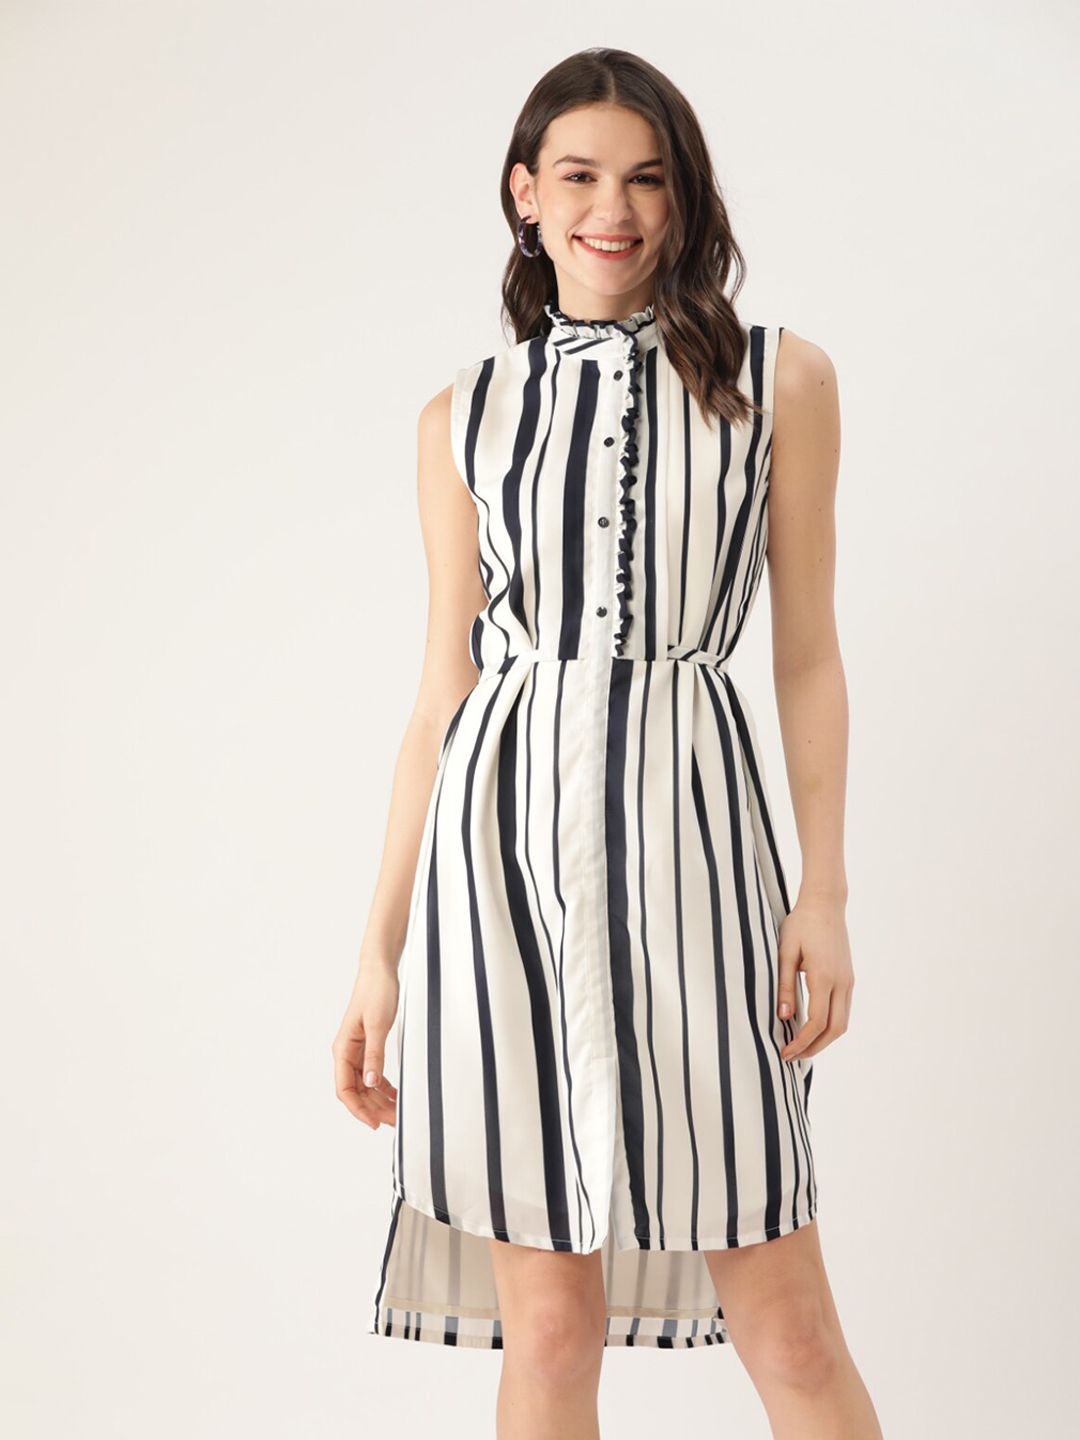 shiloh White & Navy Blue Striped A-Line Dress Price in India